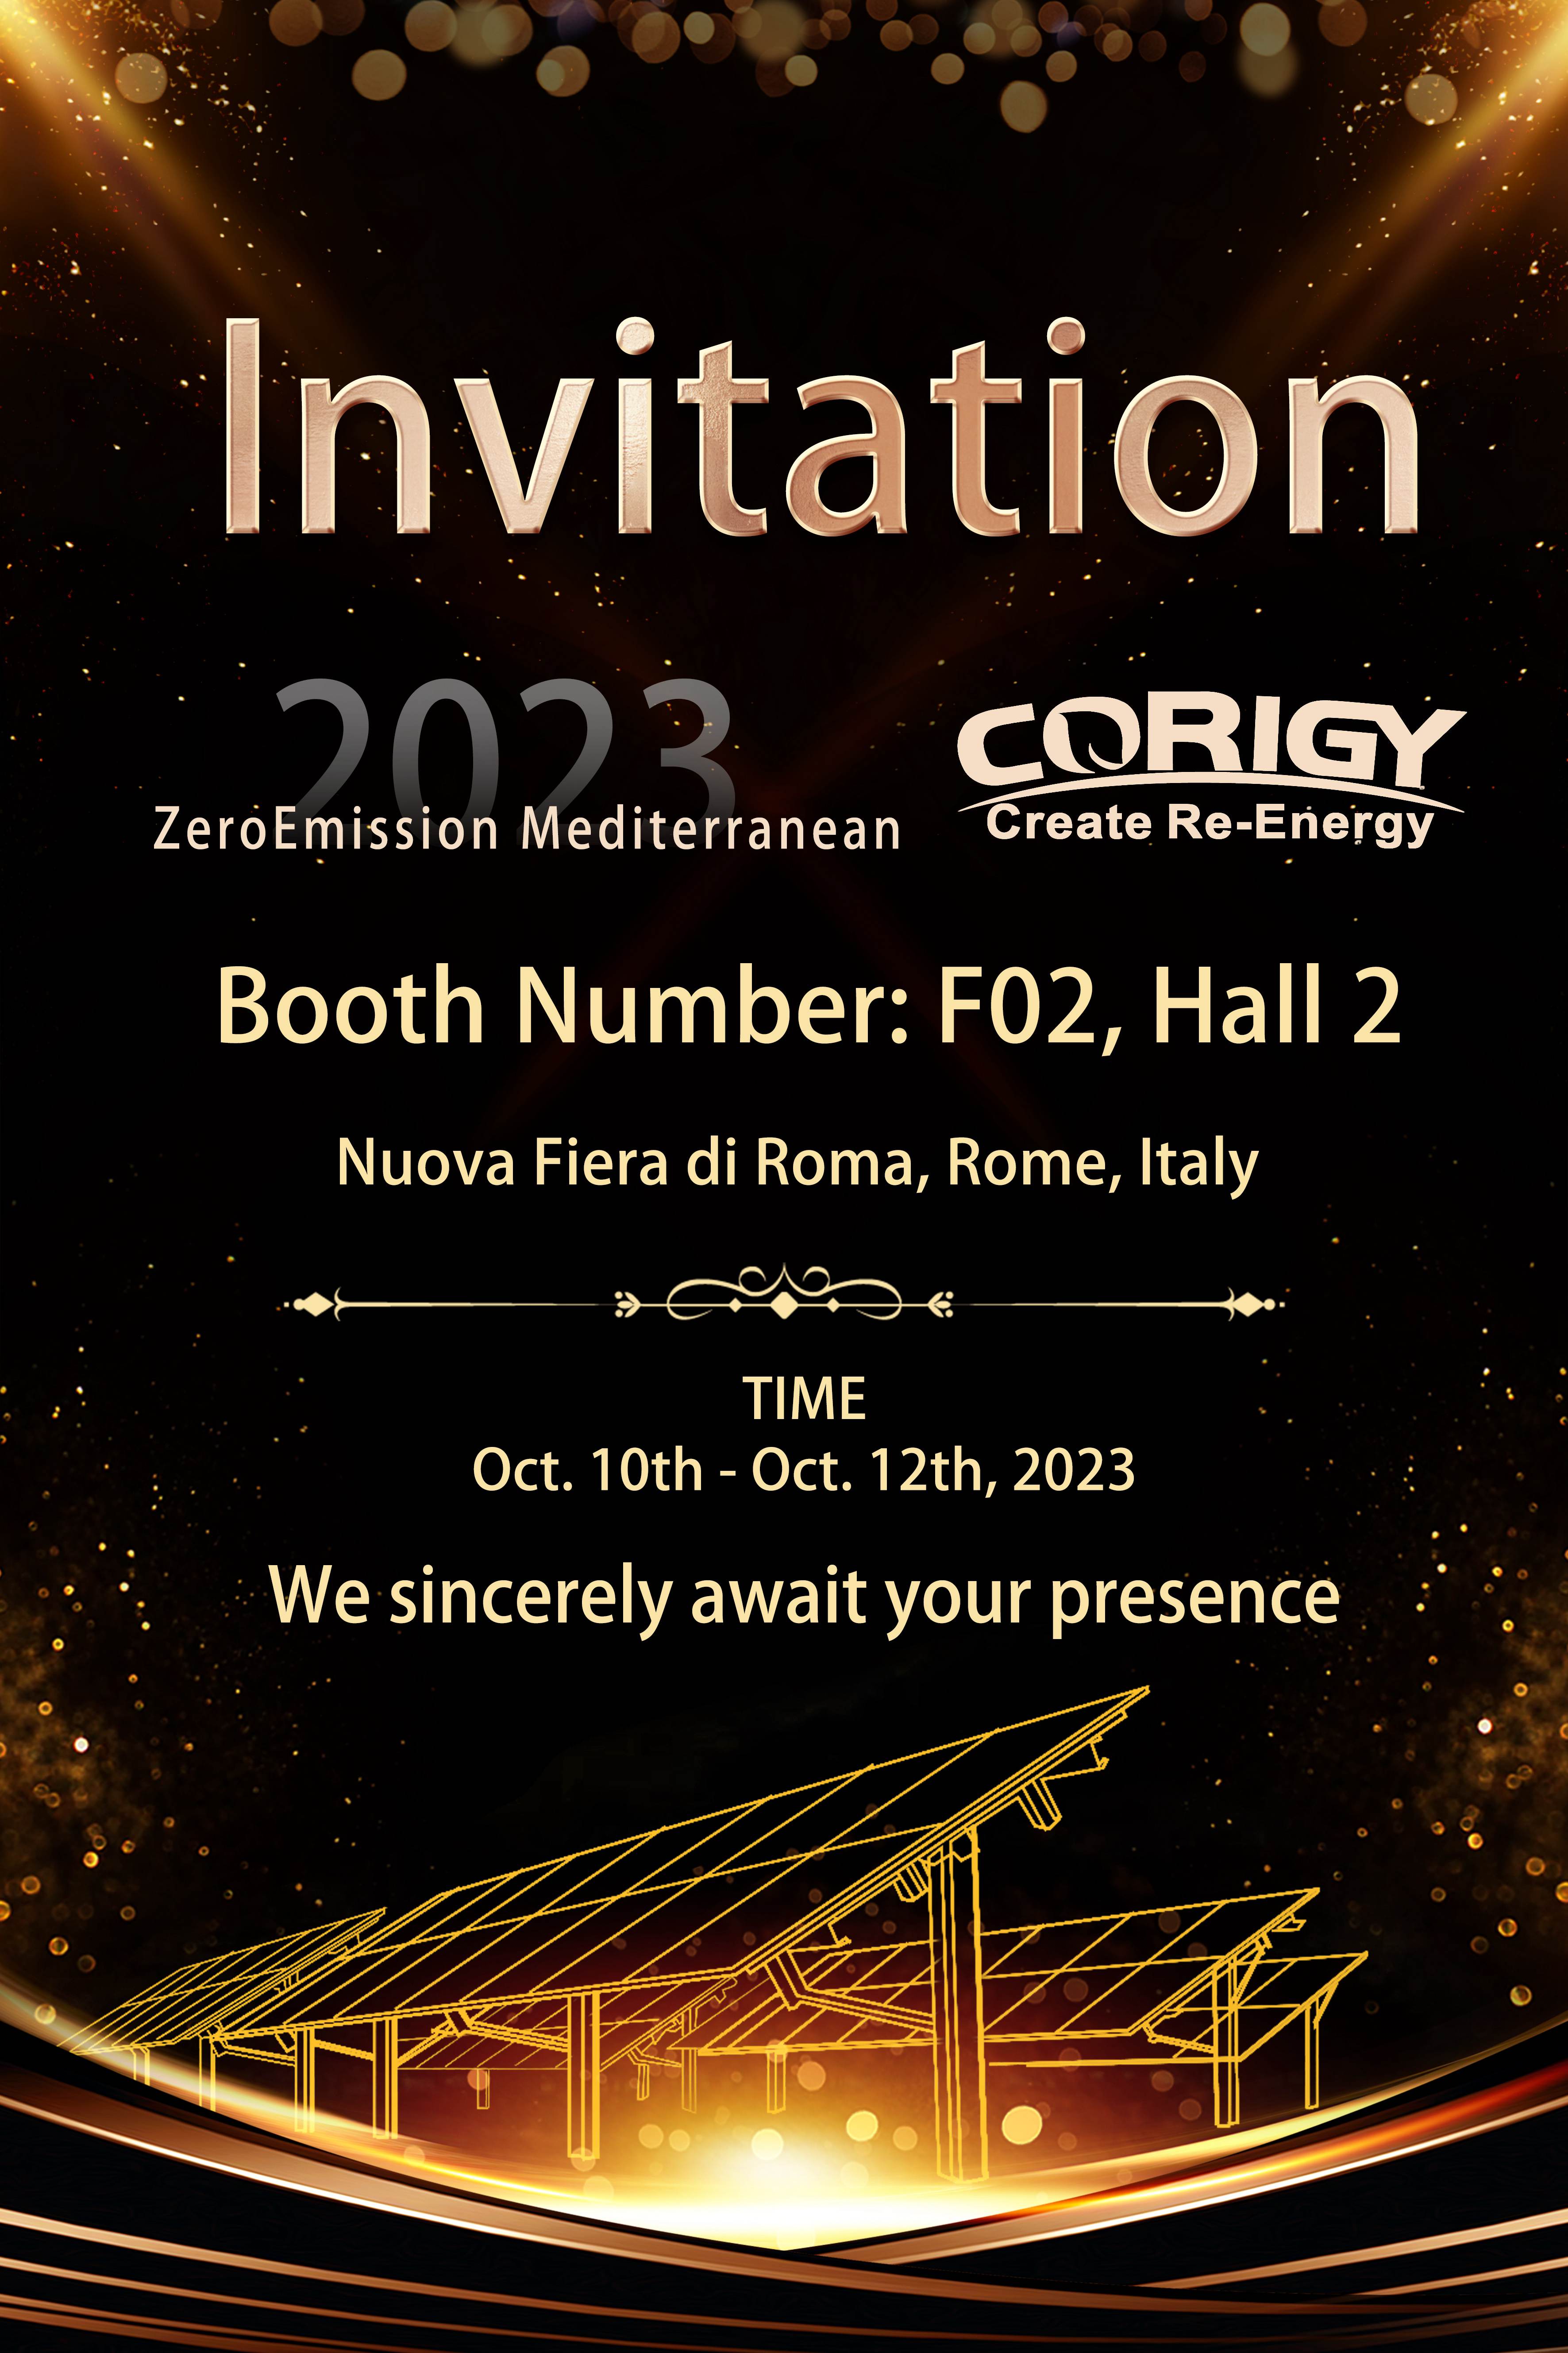 We sincerely invite you to visit our booth on ZeroEmission Mediterranean 2023 